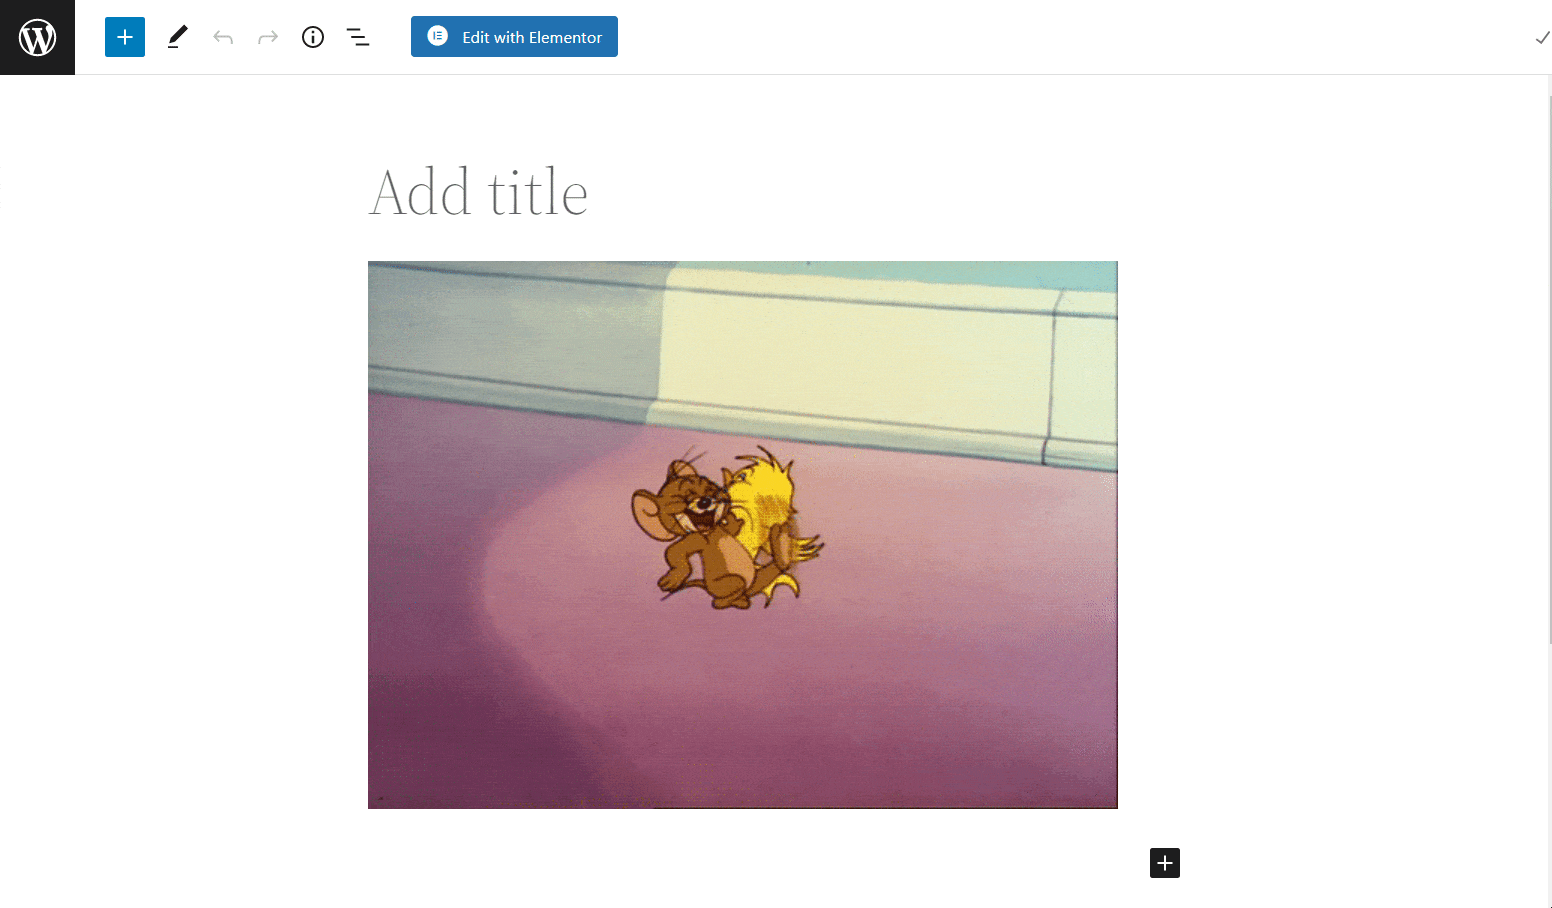 Embed Interactive GIFs